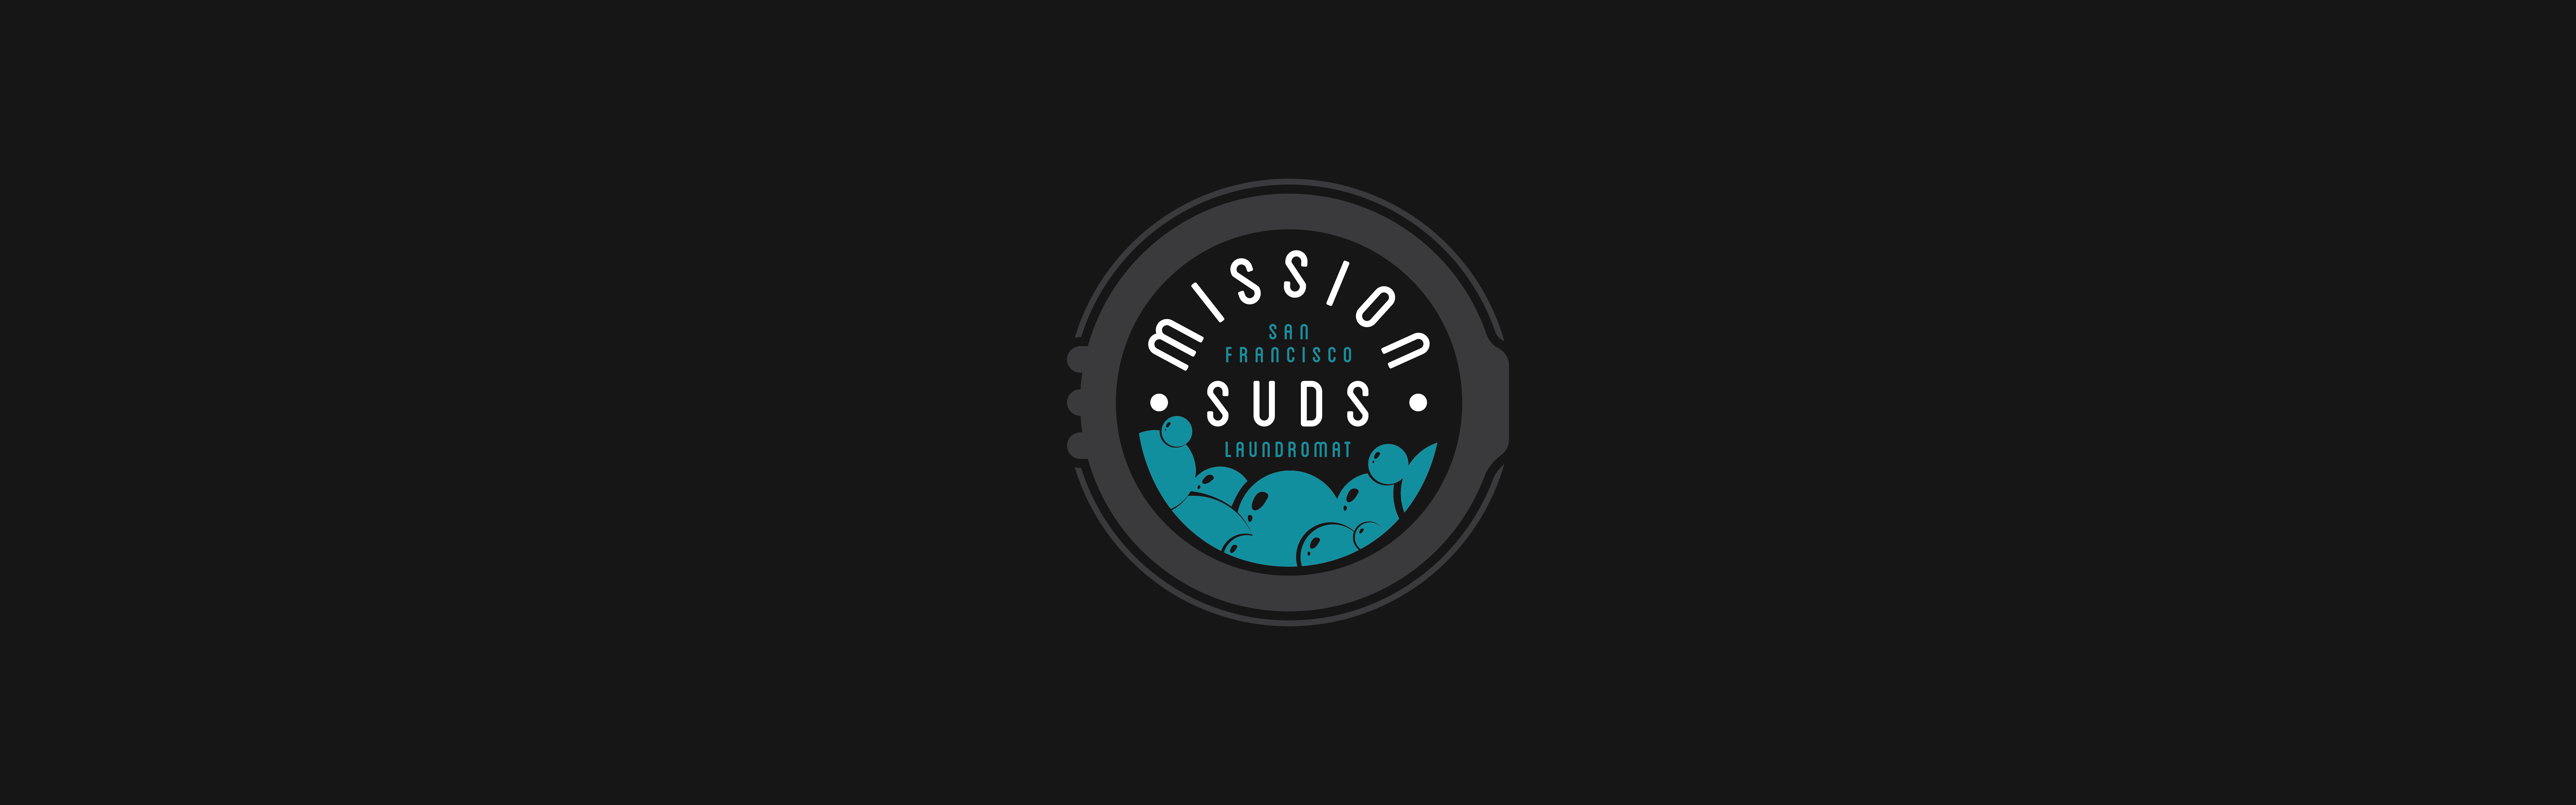 This image displays a logo featuring the words "Mission Suds" encircled by an oval, with stylized suds and bubbles illustrated beneath the text, all set against a background.